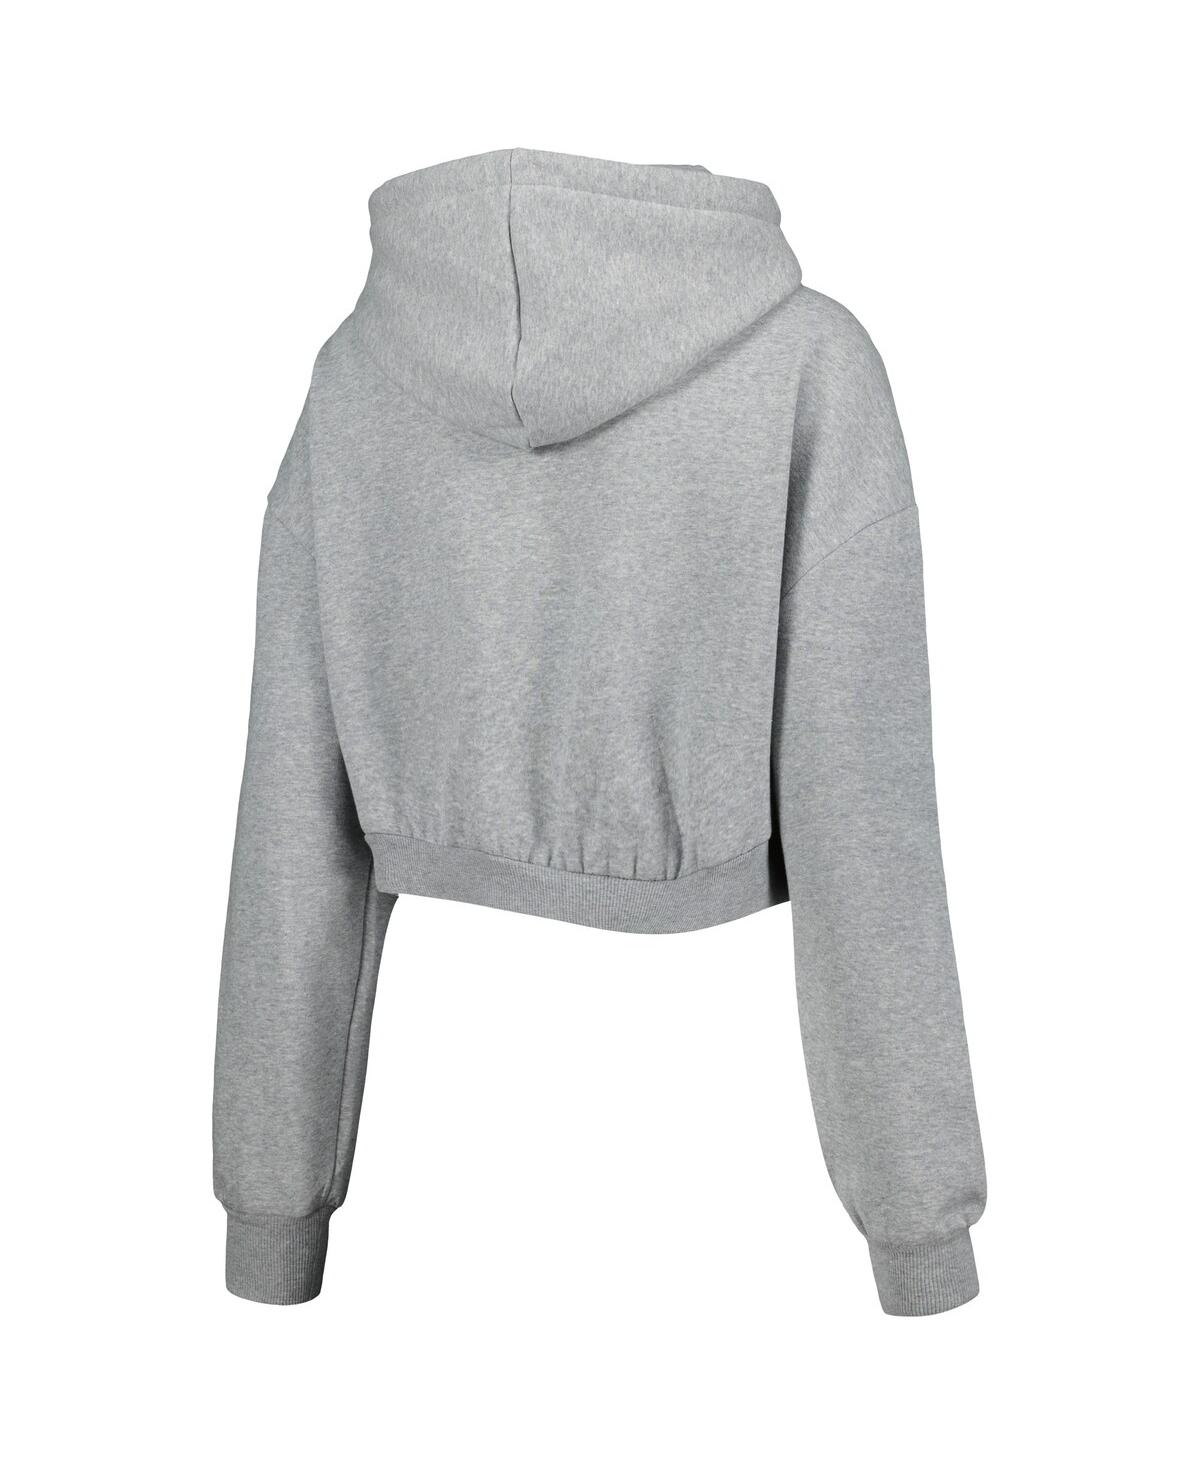 Shop The Wild Collective Women's  Gray Pittsburgh Steelers Cropped Pullover Hoodie